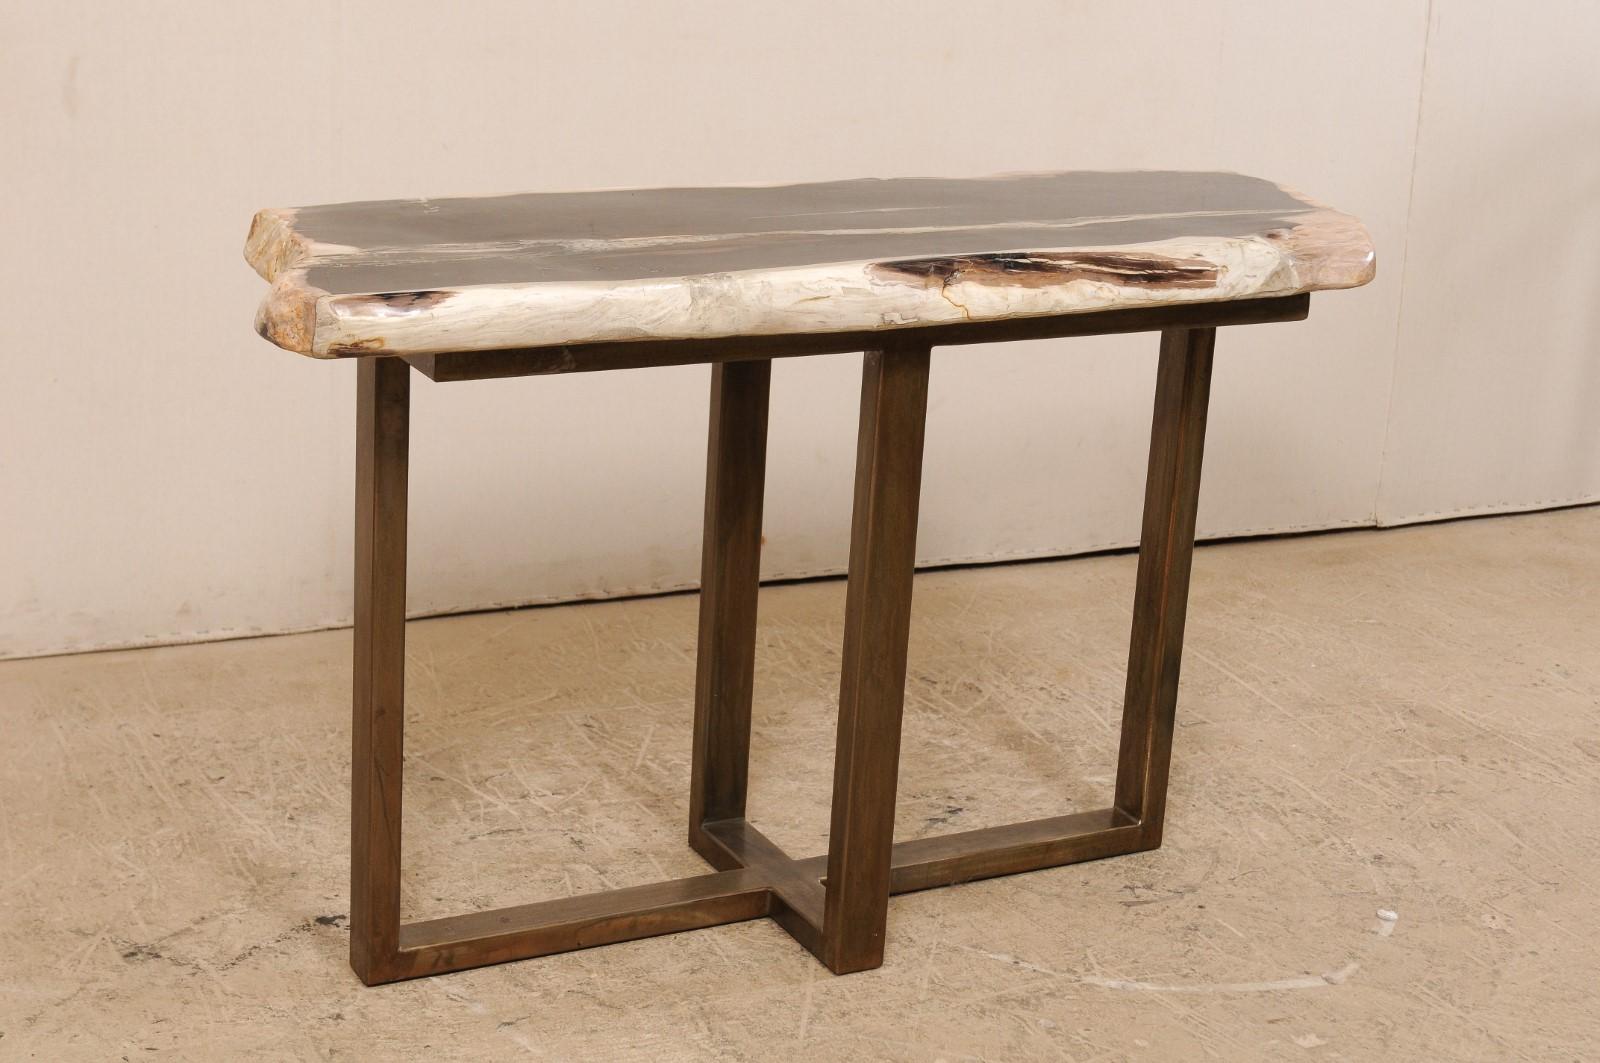 A petrified wood top modernly designed console table. This custom console table has been fashioned from a single thick slab of smoothly polished petrified wood, almost 4.5 feet in length. This fabulous petrified wood top is mostly black with shades